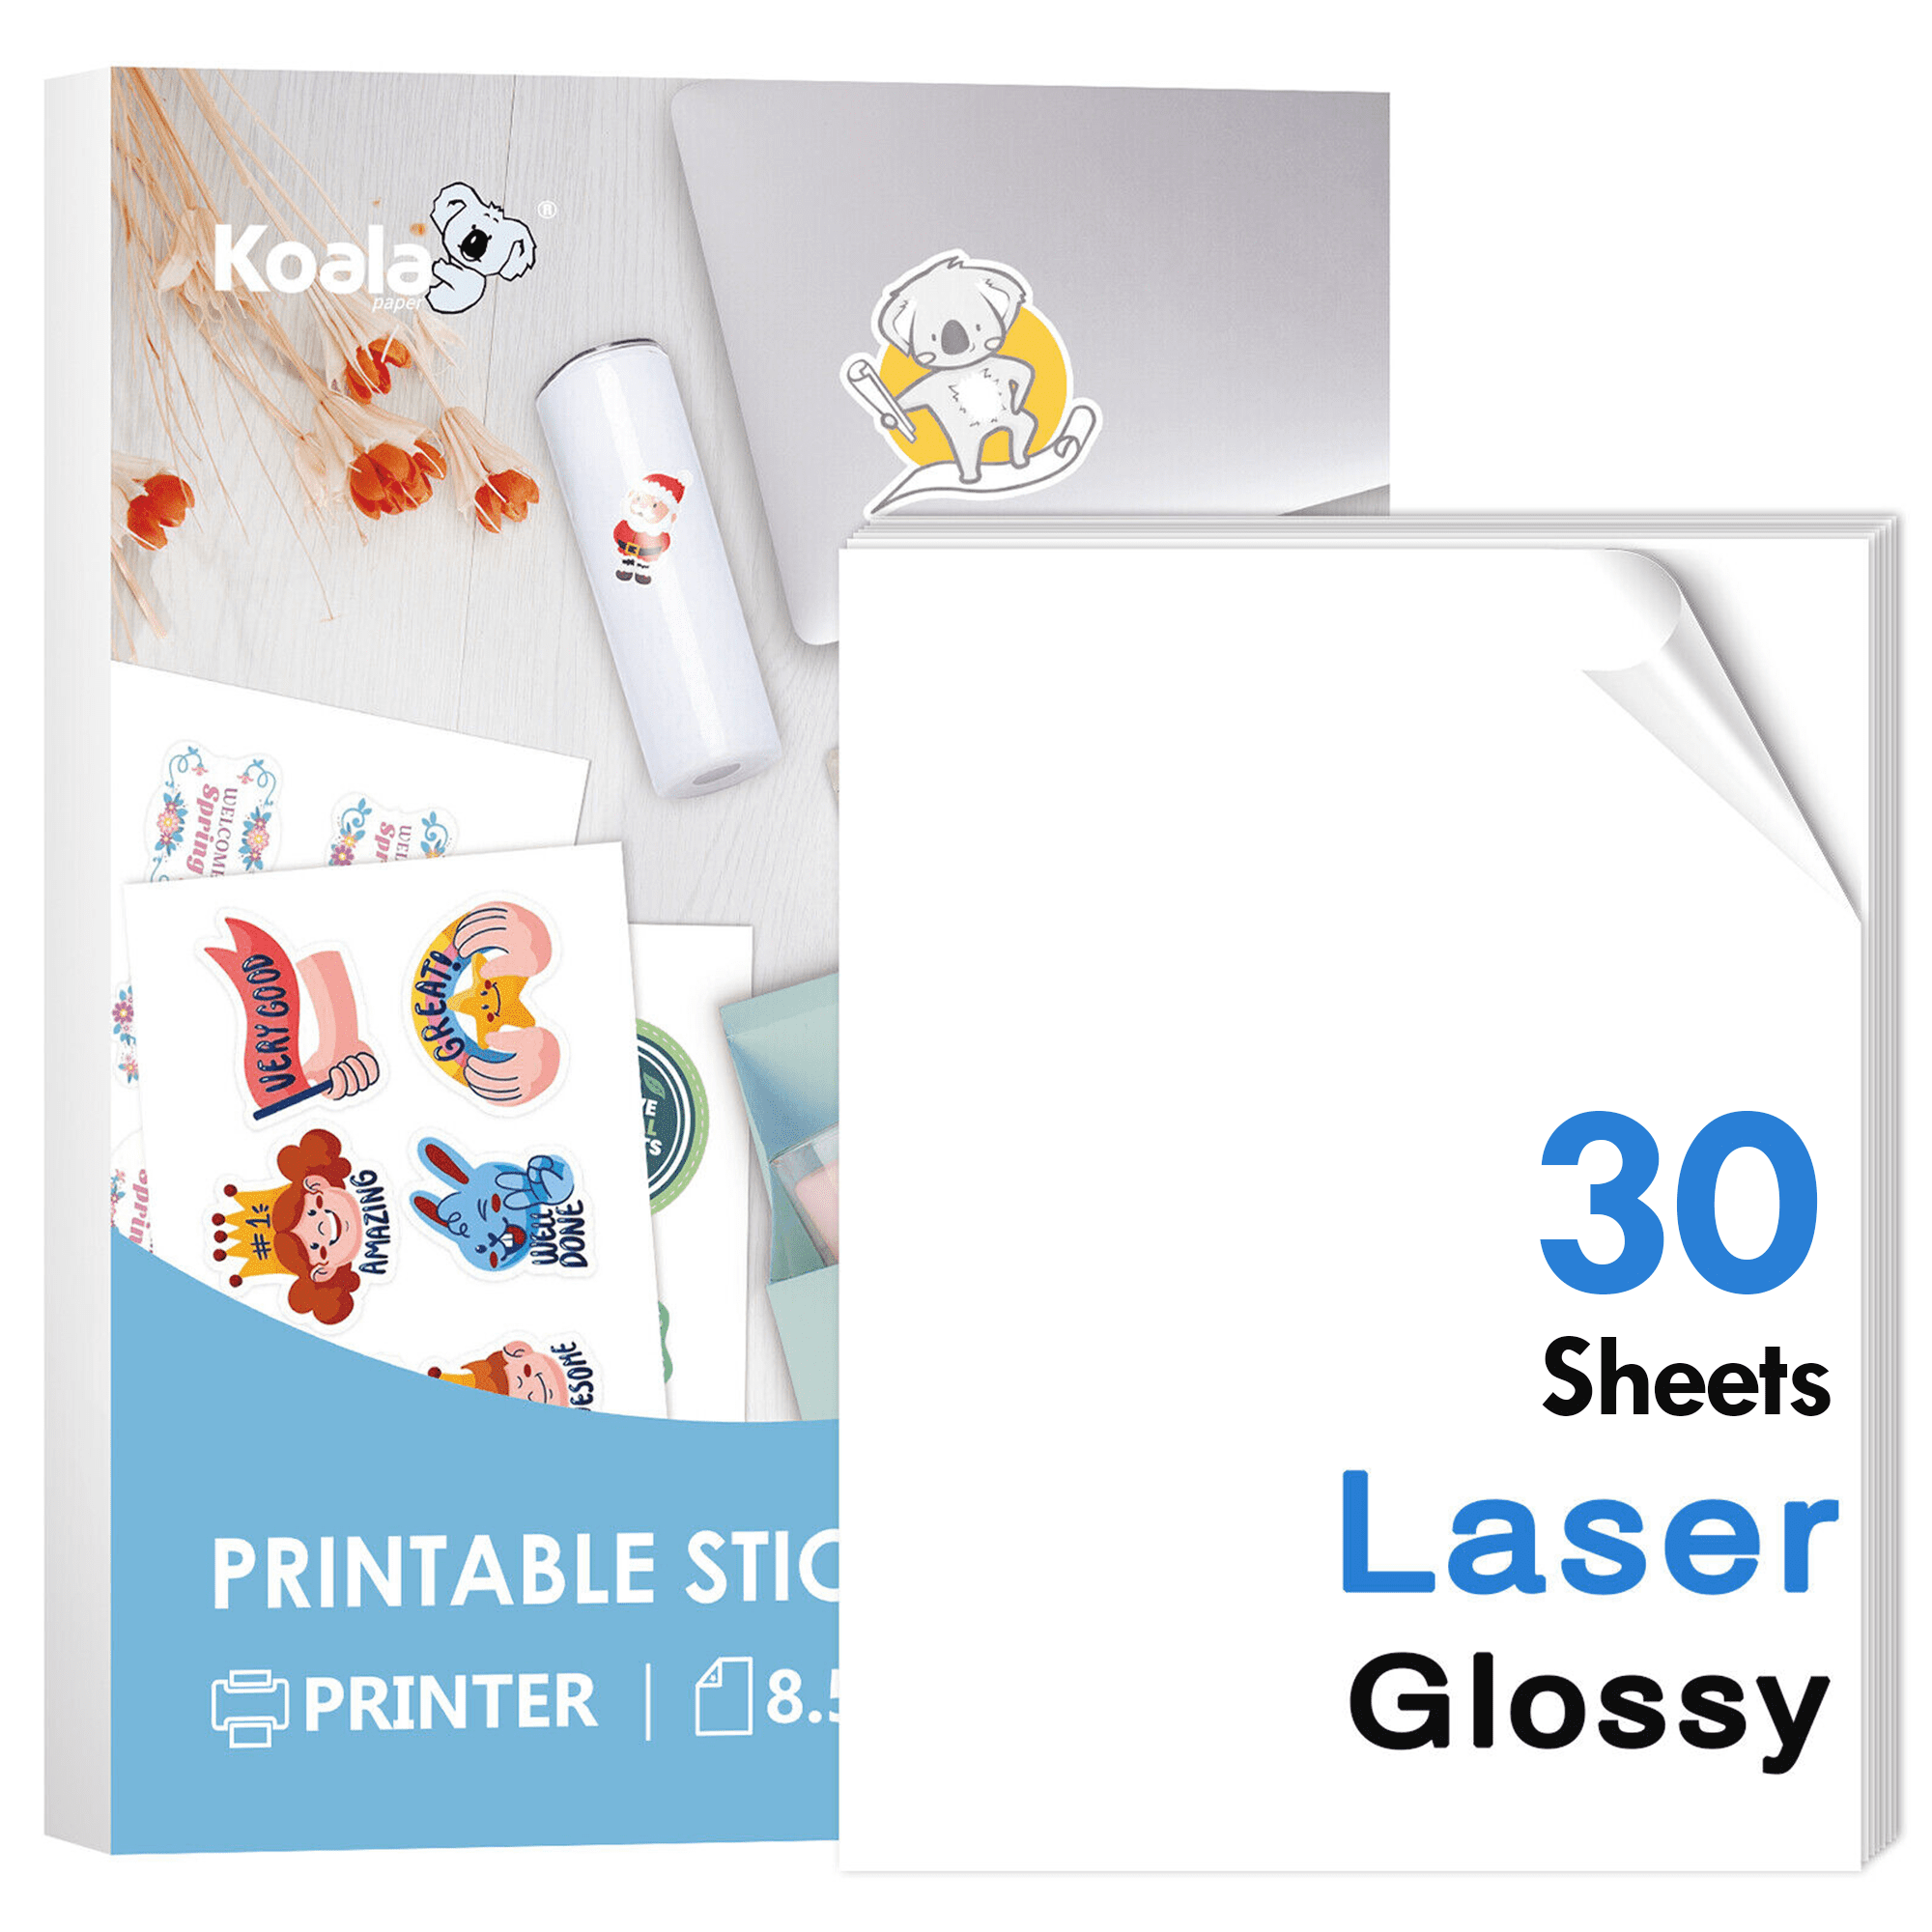  A-SUB Clear Sticker Paper for Inkjet Printers, Waterproof  Transparent Printable Vinyl Sticker Paper, 50 Sheets 8.5x11 Inch Glossy  Clear Label Paper for Custom Stickers, Decals : Office Products